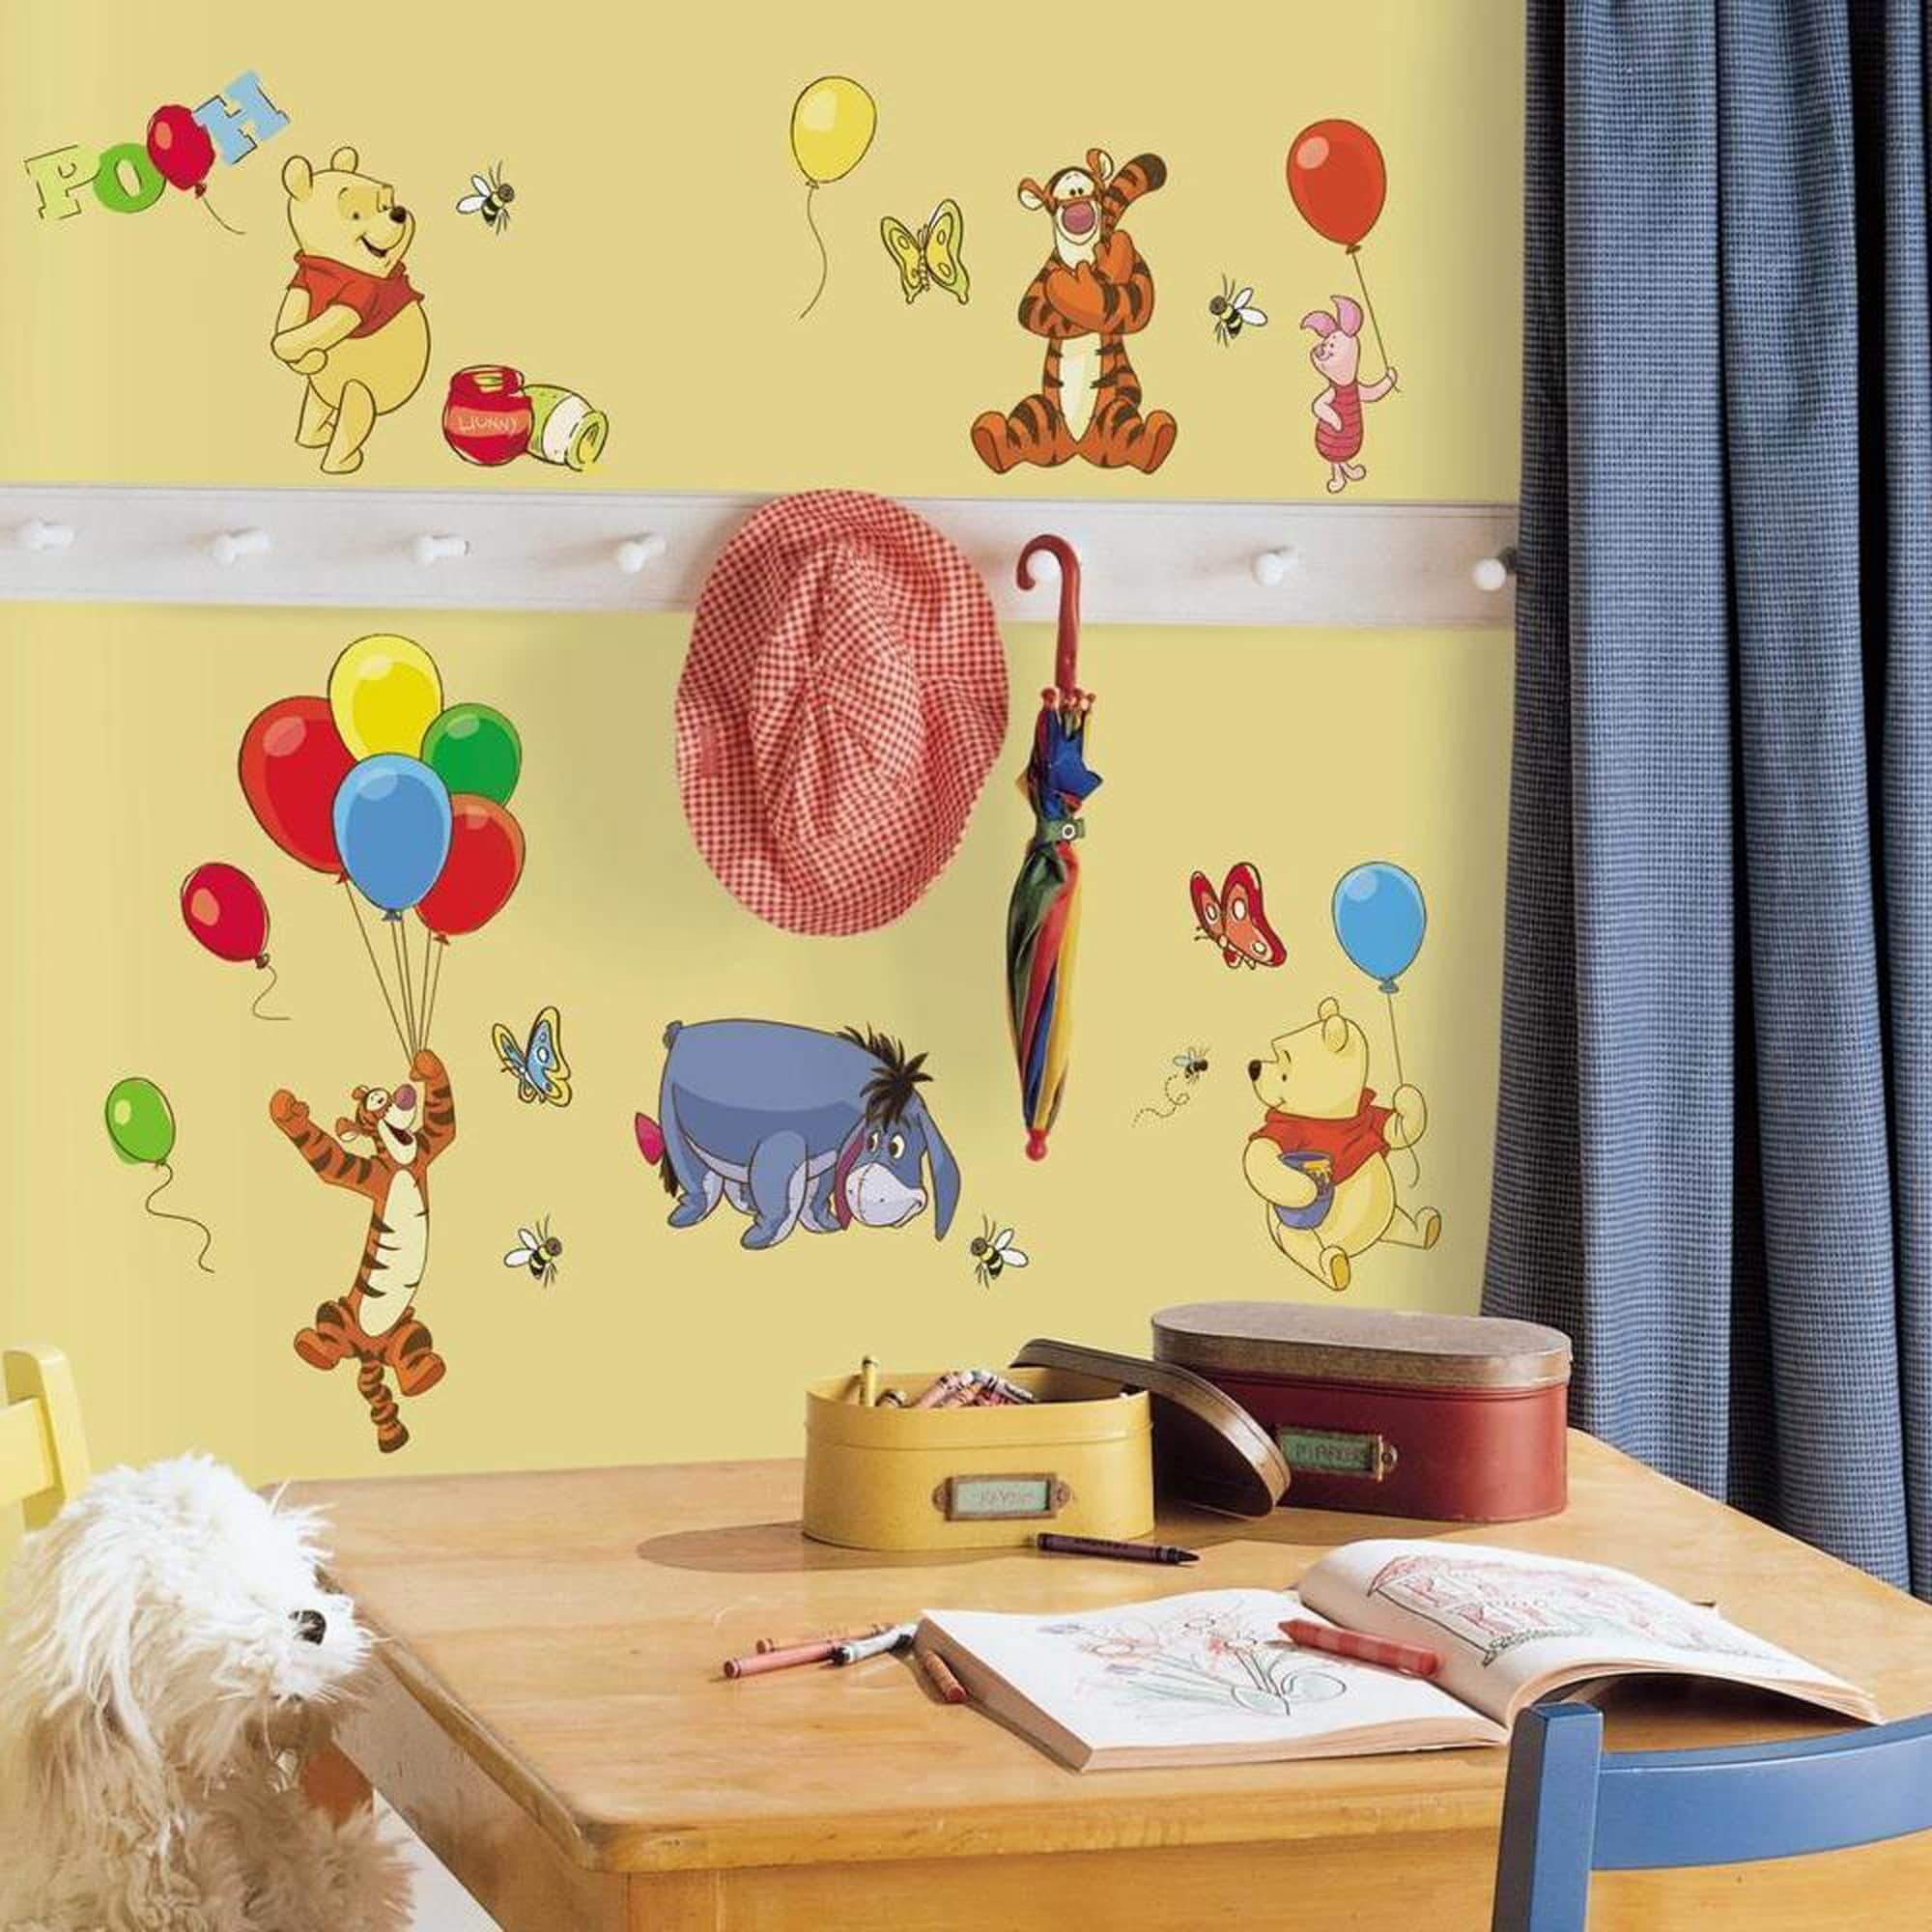 https://ak1.ostkcdn.com/images/products/is/images/direct/7220ef1672816af6b99ec644afb938cc2d140597/Roommates-Decor-Winnie-the-Pooh-%26-Friends-Peel-%26-Stick-Wall-Decal.jpg